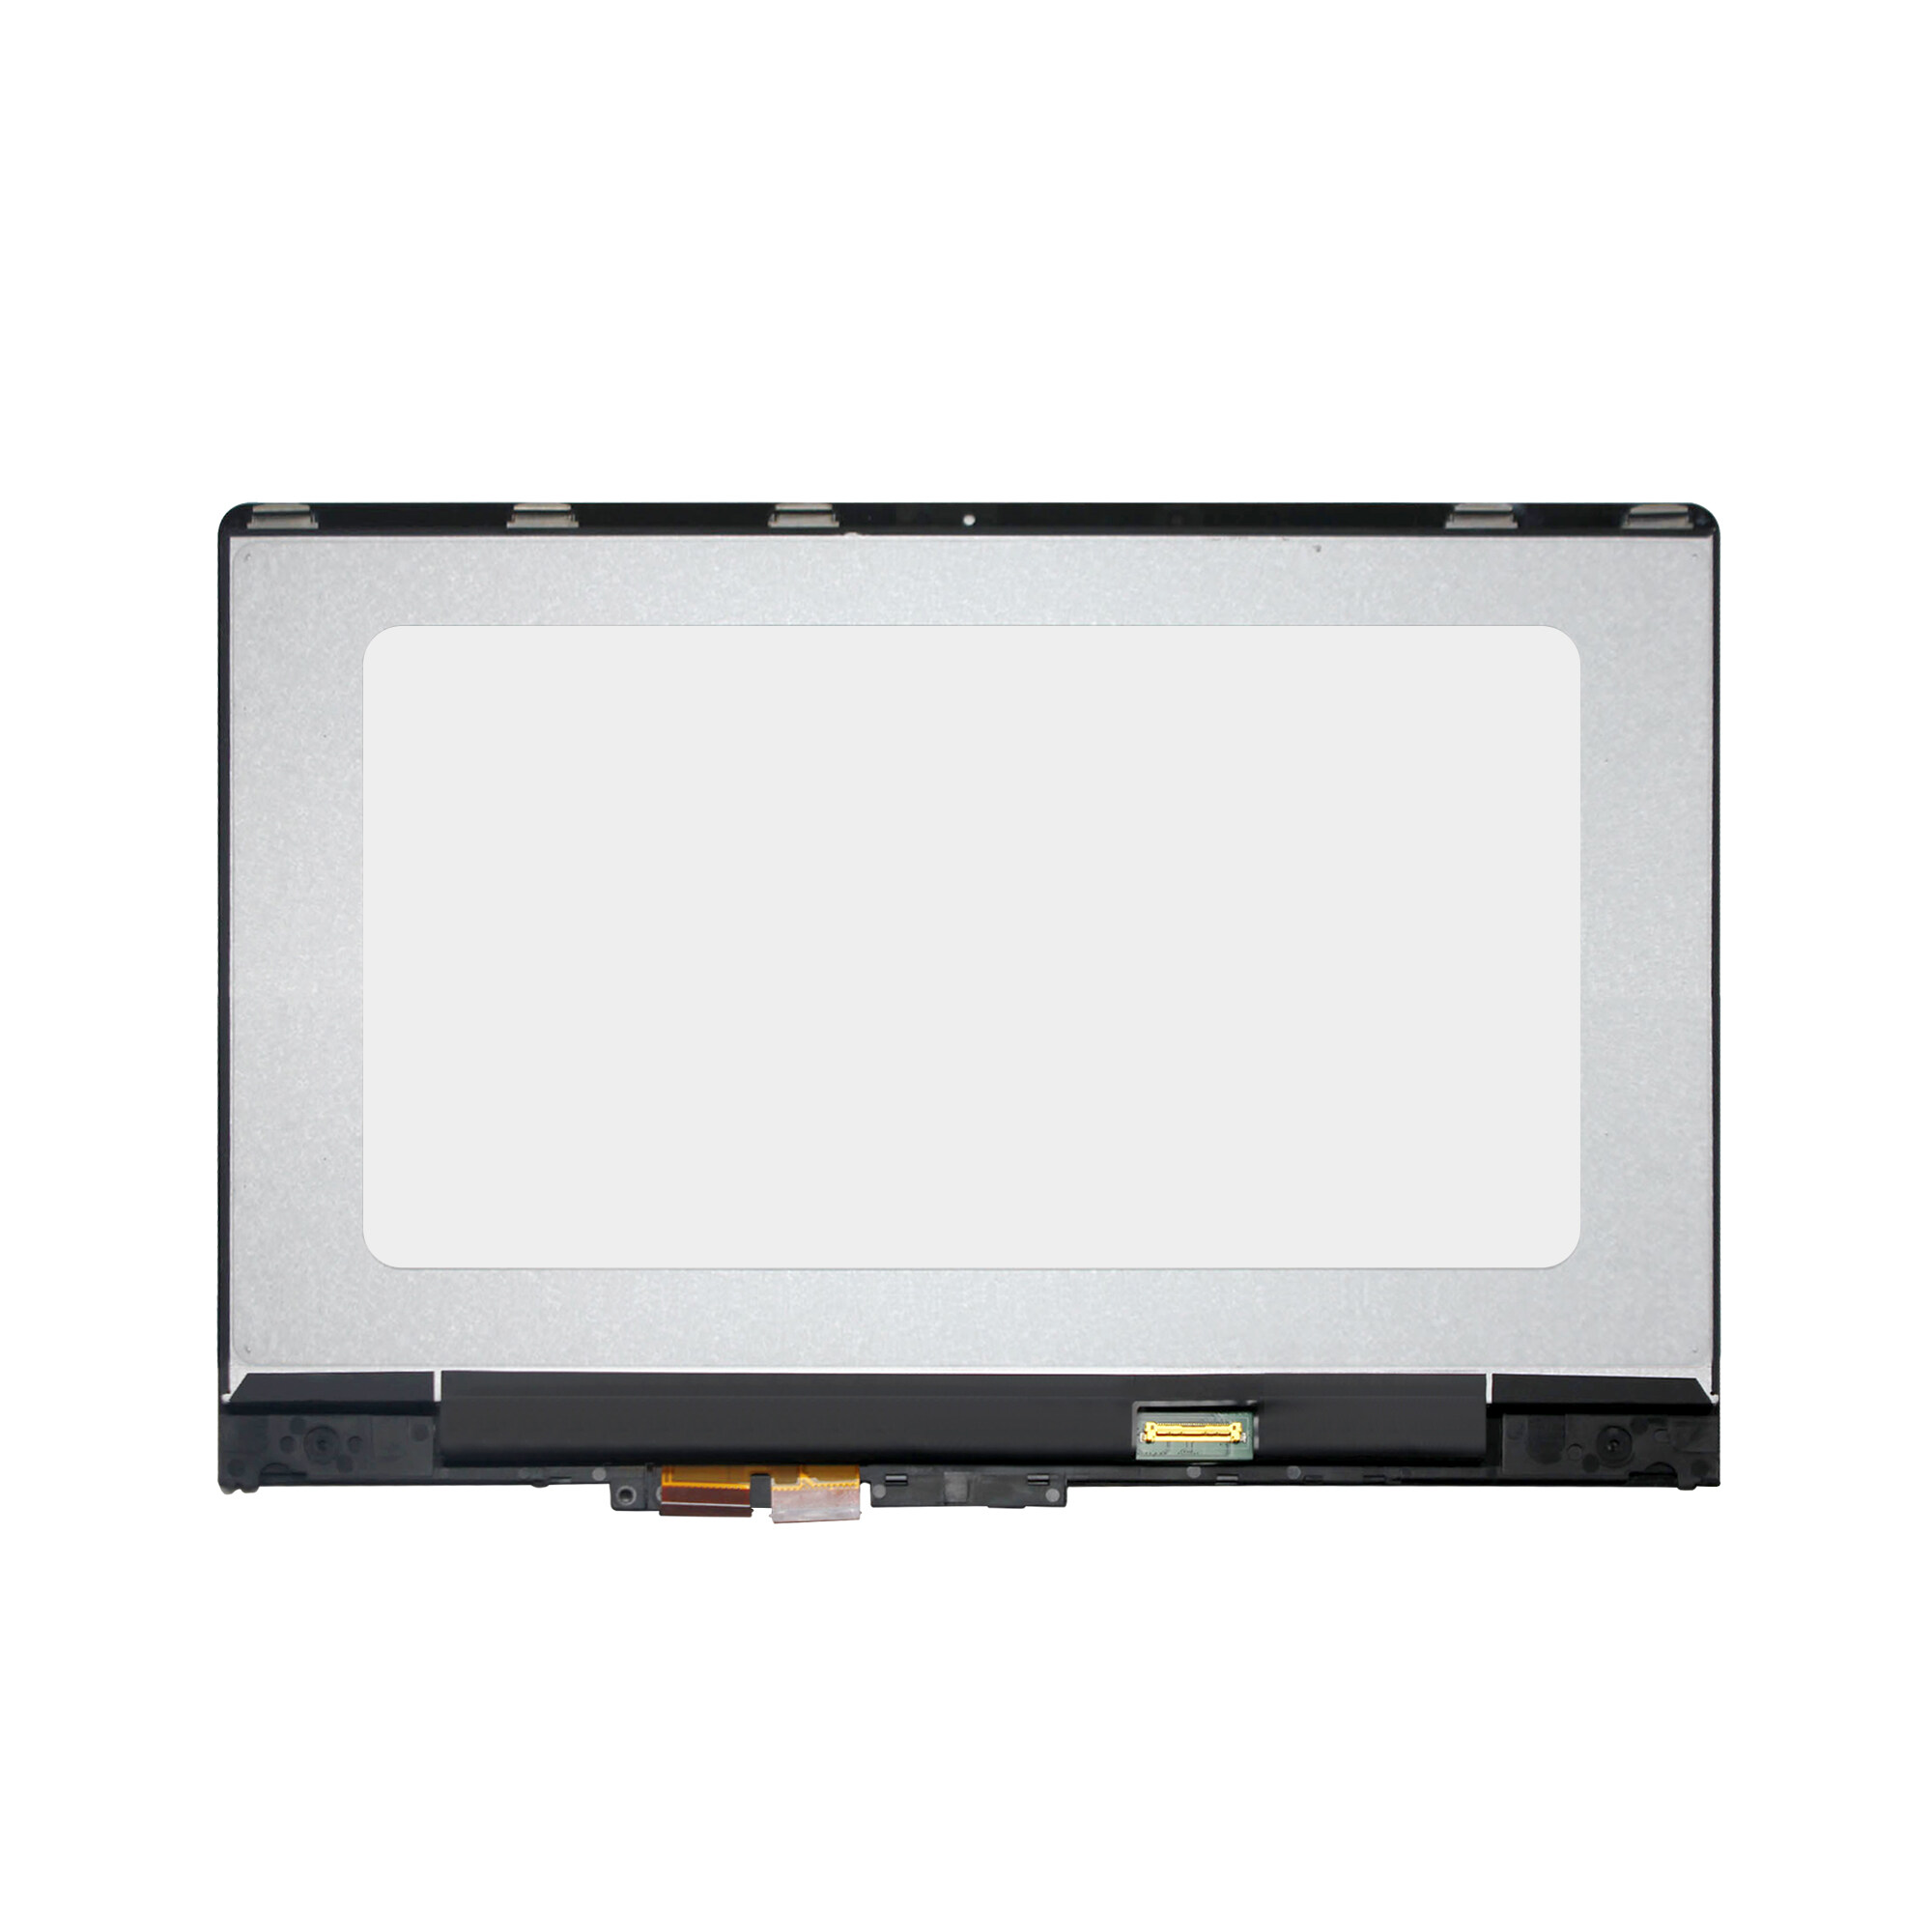 Kreplacement 14.0" IPS LCD Touch Screen Assembly+Bezel For Lenovo Yoga 710-14